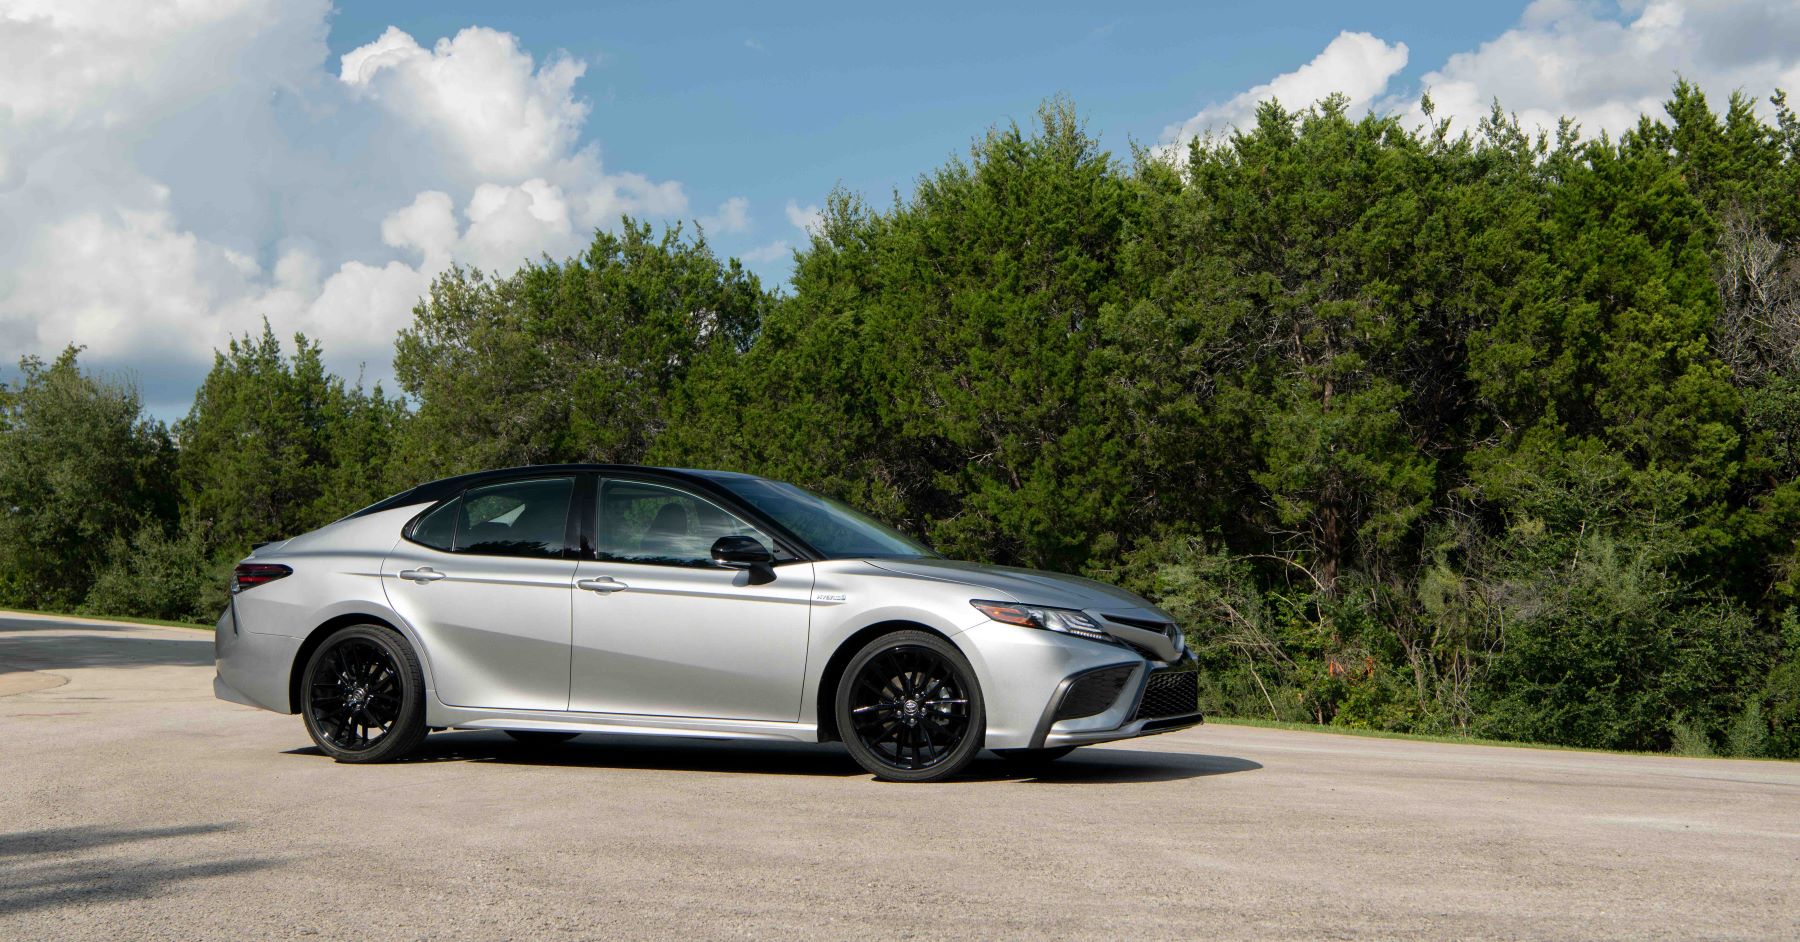 A silver 2022 Toyota Camry Hybrid XSE midsize sedan with a black roof, the Camry Hybrid is one of many new cars with the best gas mileage in 2022